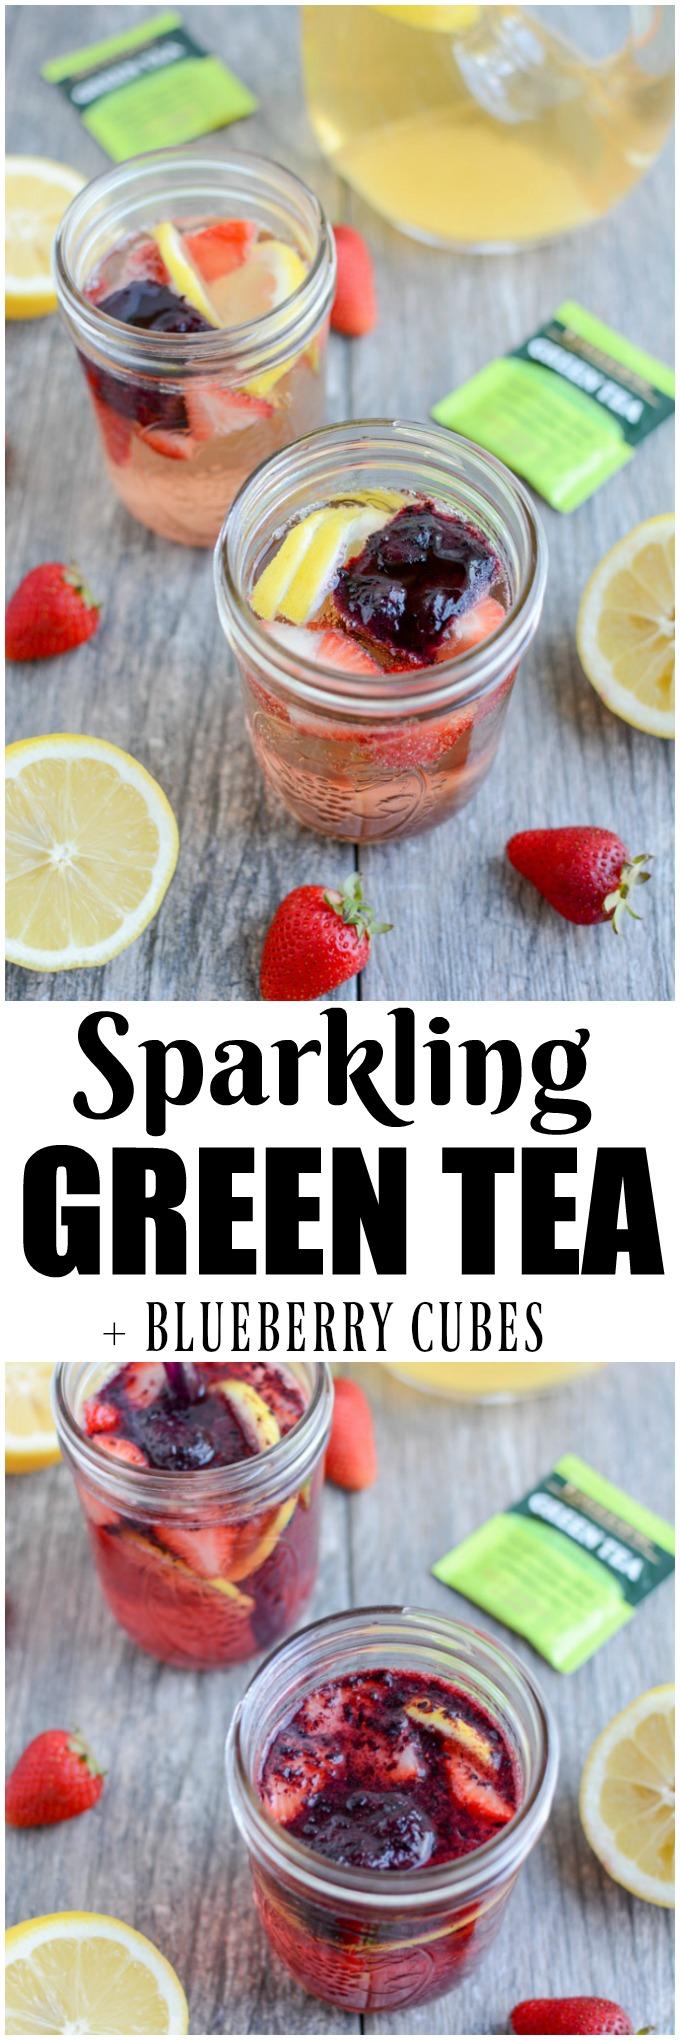 This Sparkling Green Tea is perfect for summer. Add some bubbles to make it more exciting and some frozen fruit cubes to cool it down while adding flavor!